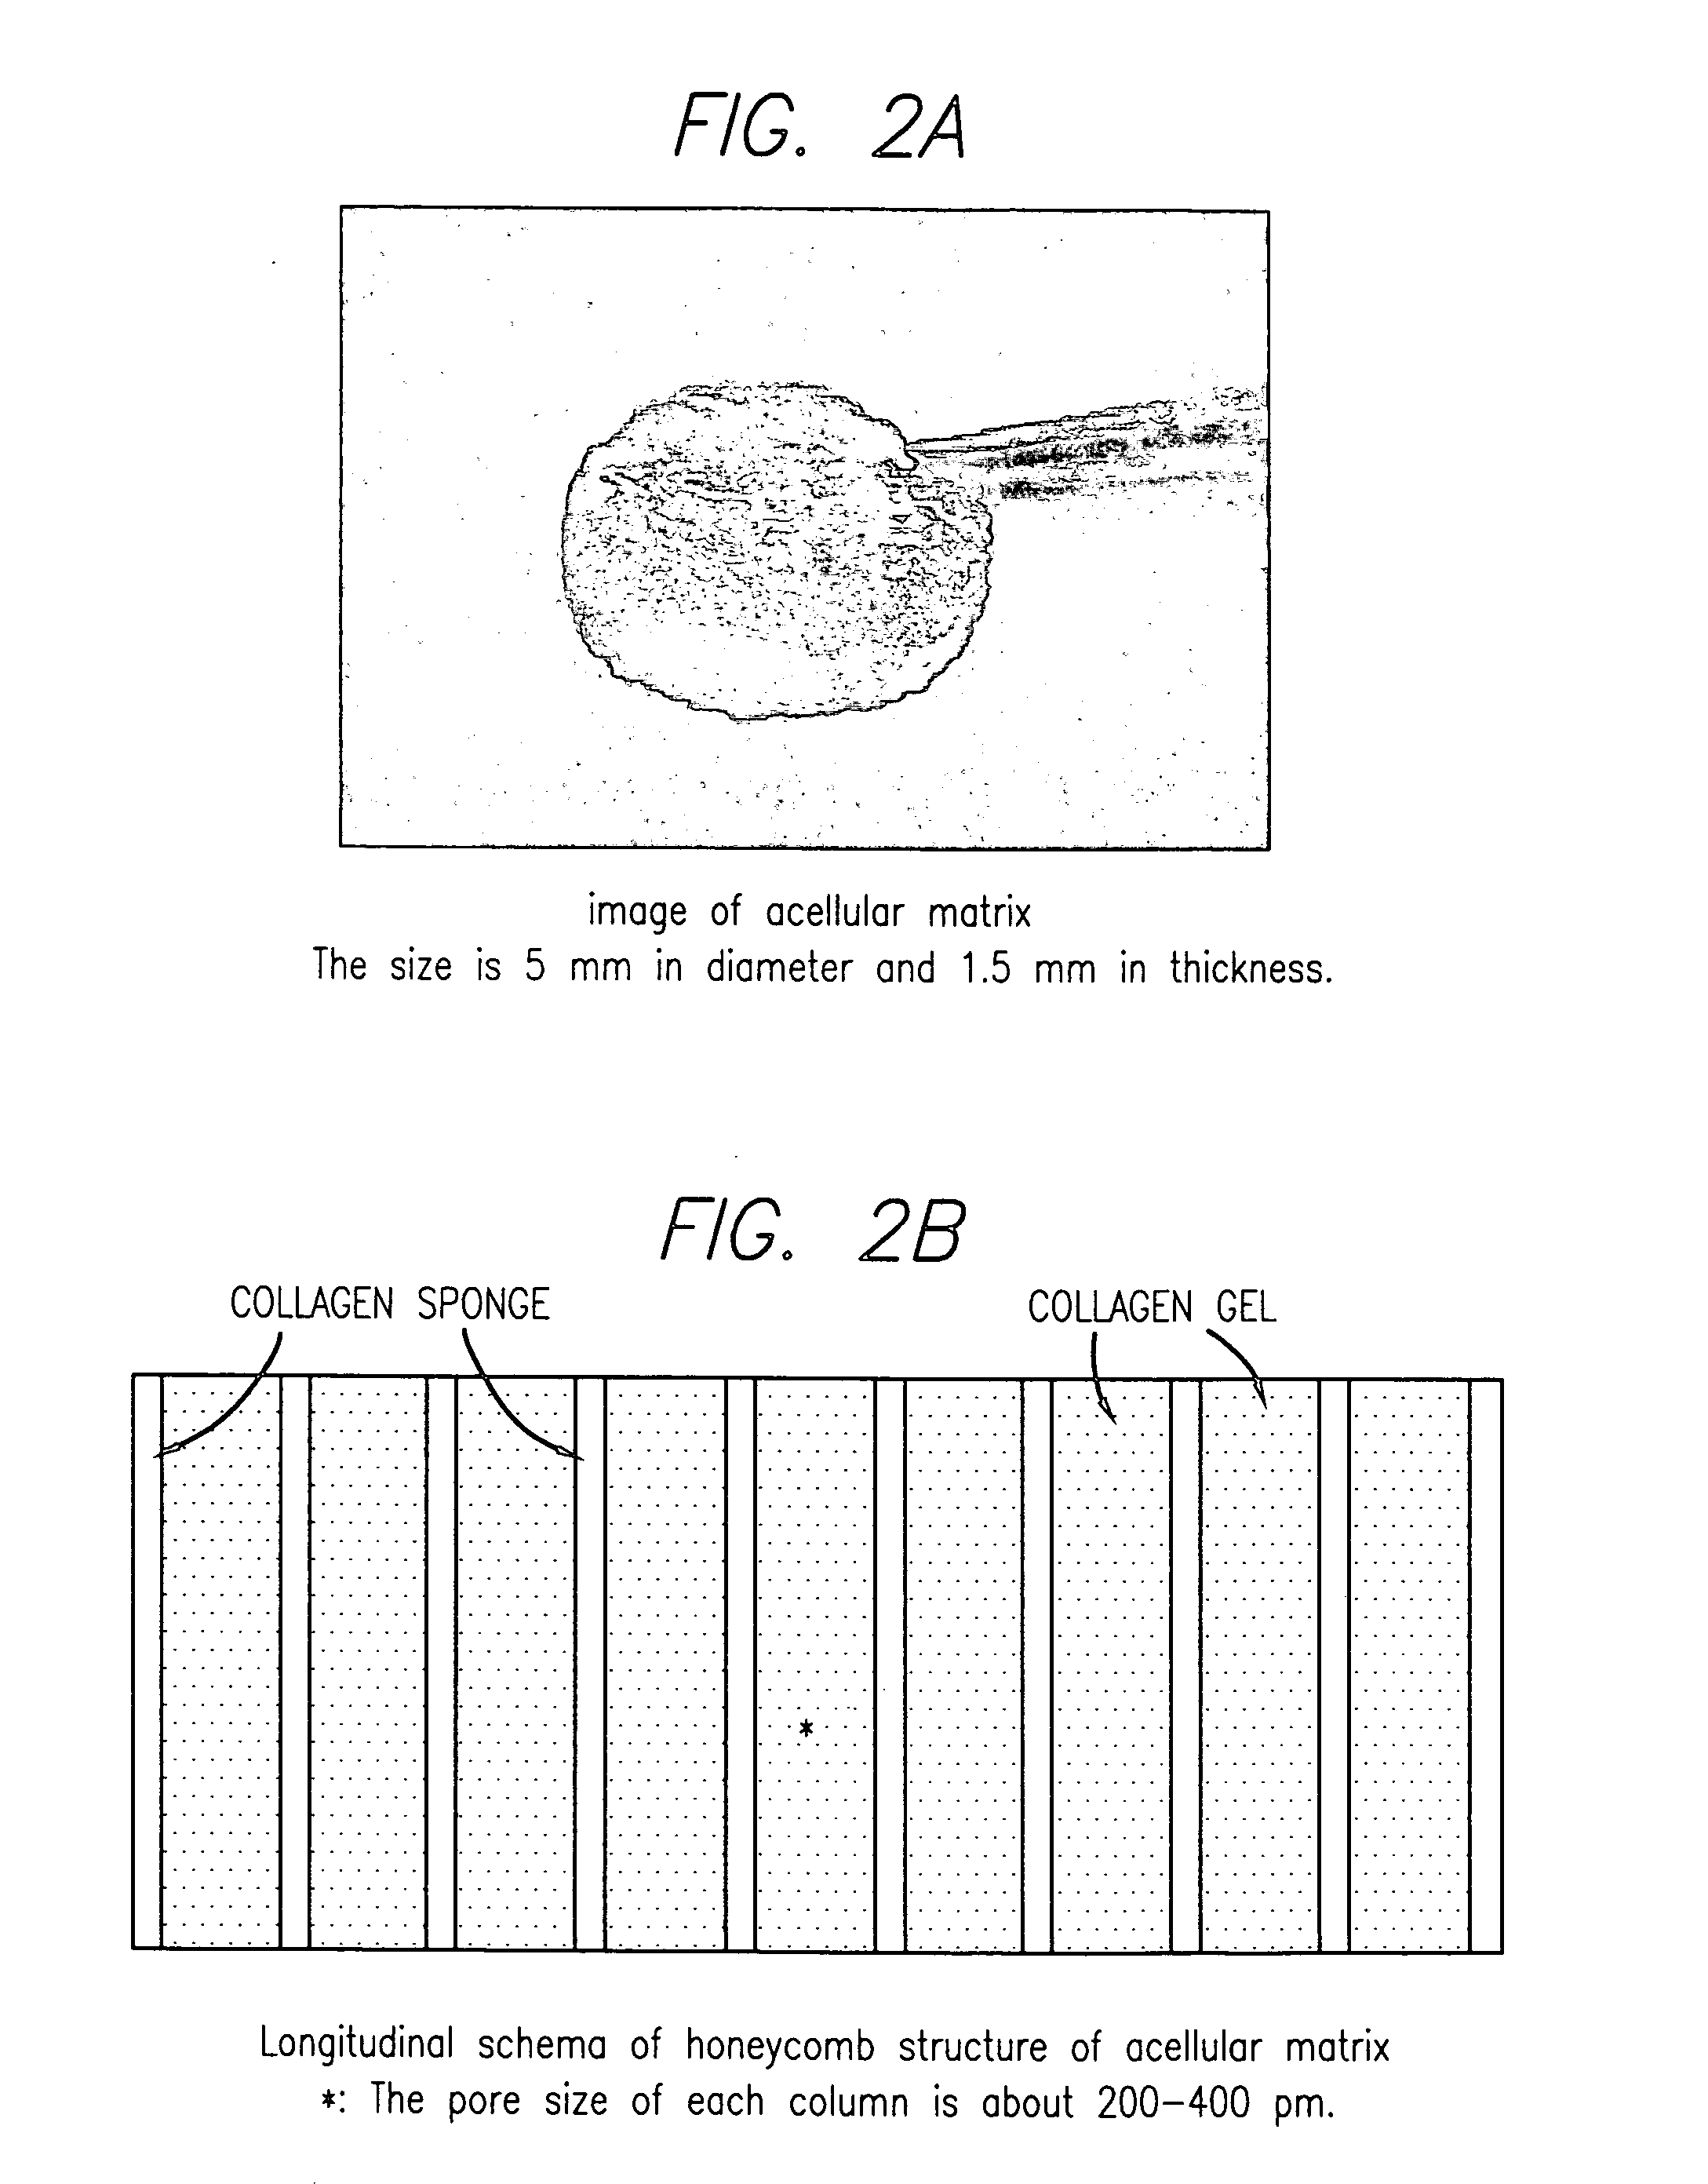 Biocompatible tissue sealant for treatment of osteochondral and bone defects using an acellular matrix implant